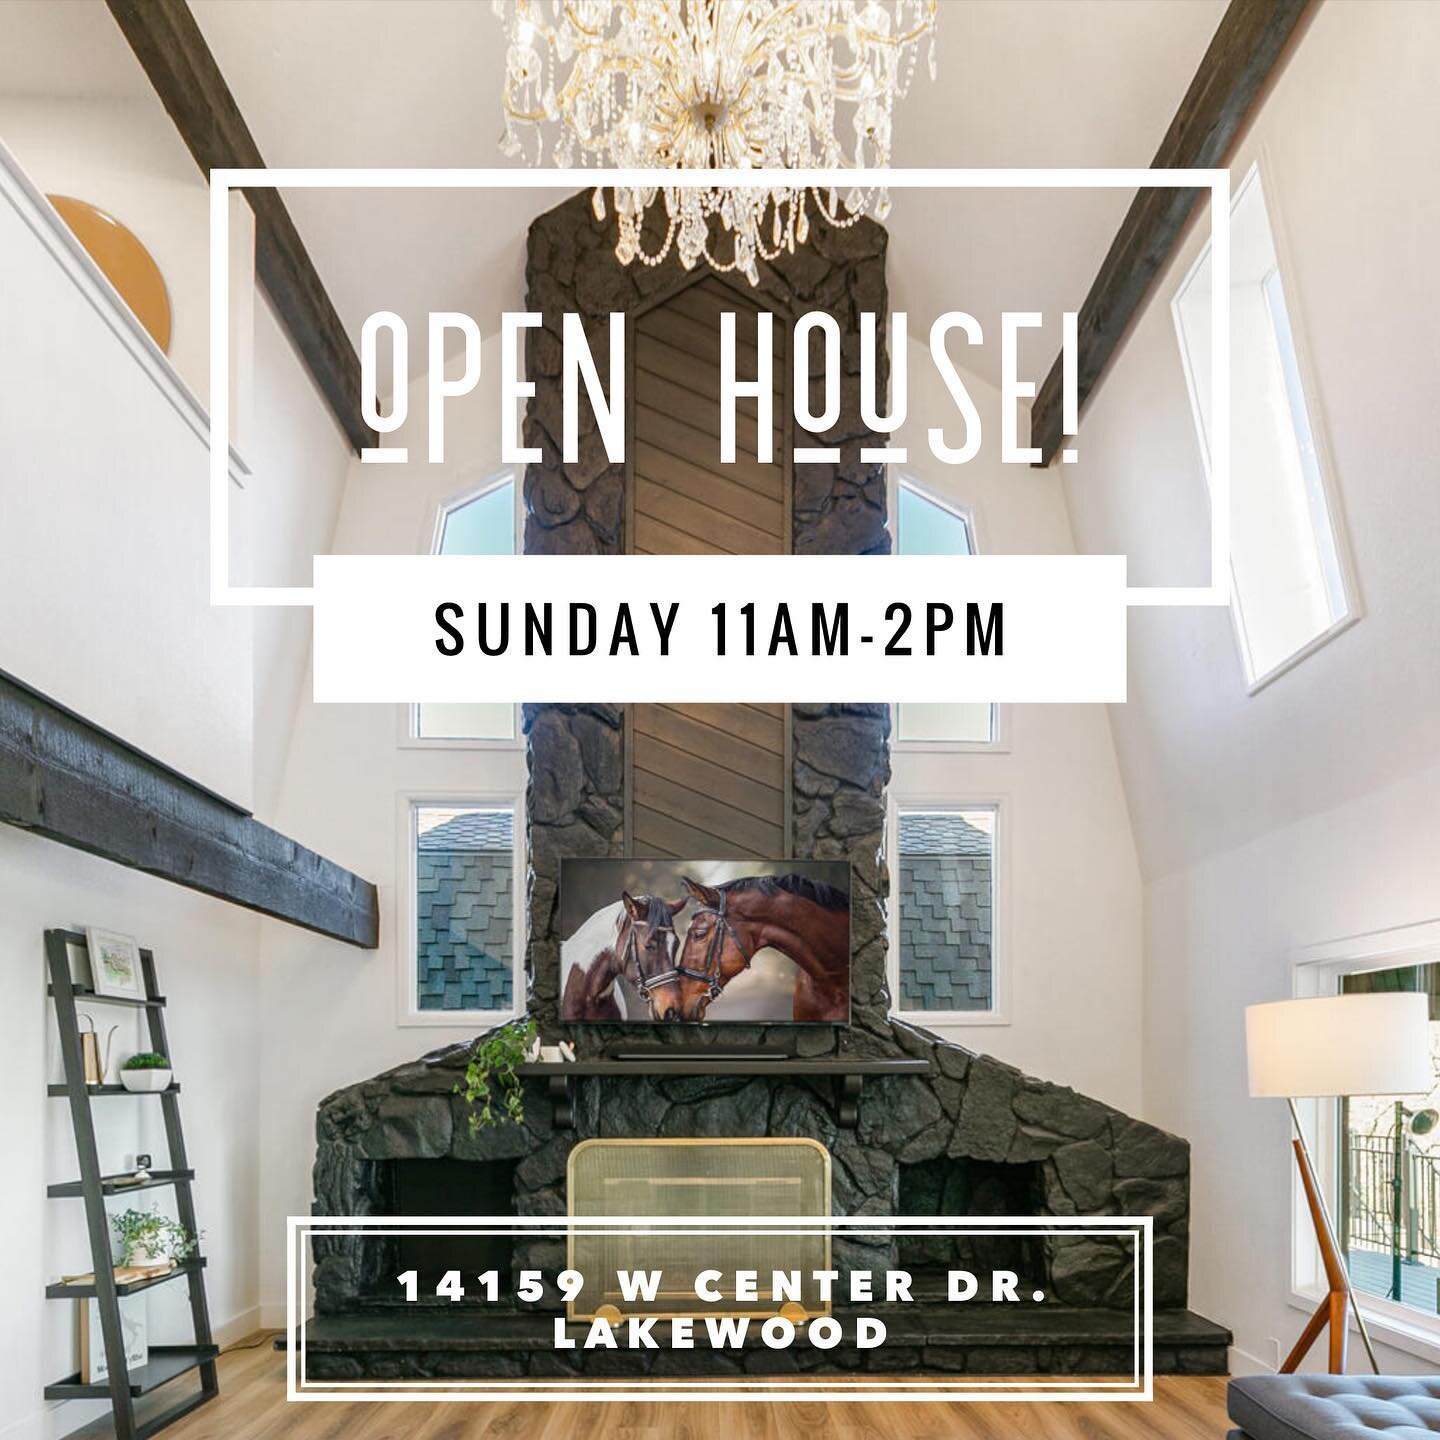 ✨OPEN HOUSE!✨ Come check out our #openhouse tomorrow (3.26) from 11am-2pm at our fabulous listing in Green Mountain! 

🛏️ 4 beds | 🛁 3.5 baths | 🏡 4,325 sf | 🏔️ .27 acres | 🏷️ $1,495,000 |📍14159 W Center Dr Lakewood🧡 Send me a message if you&r